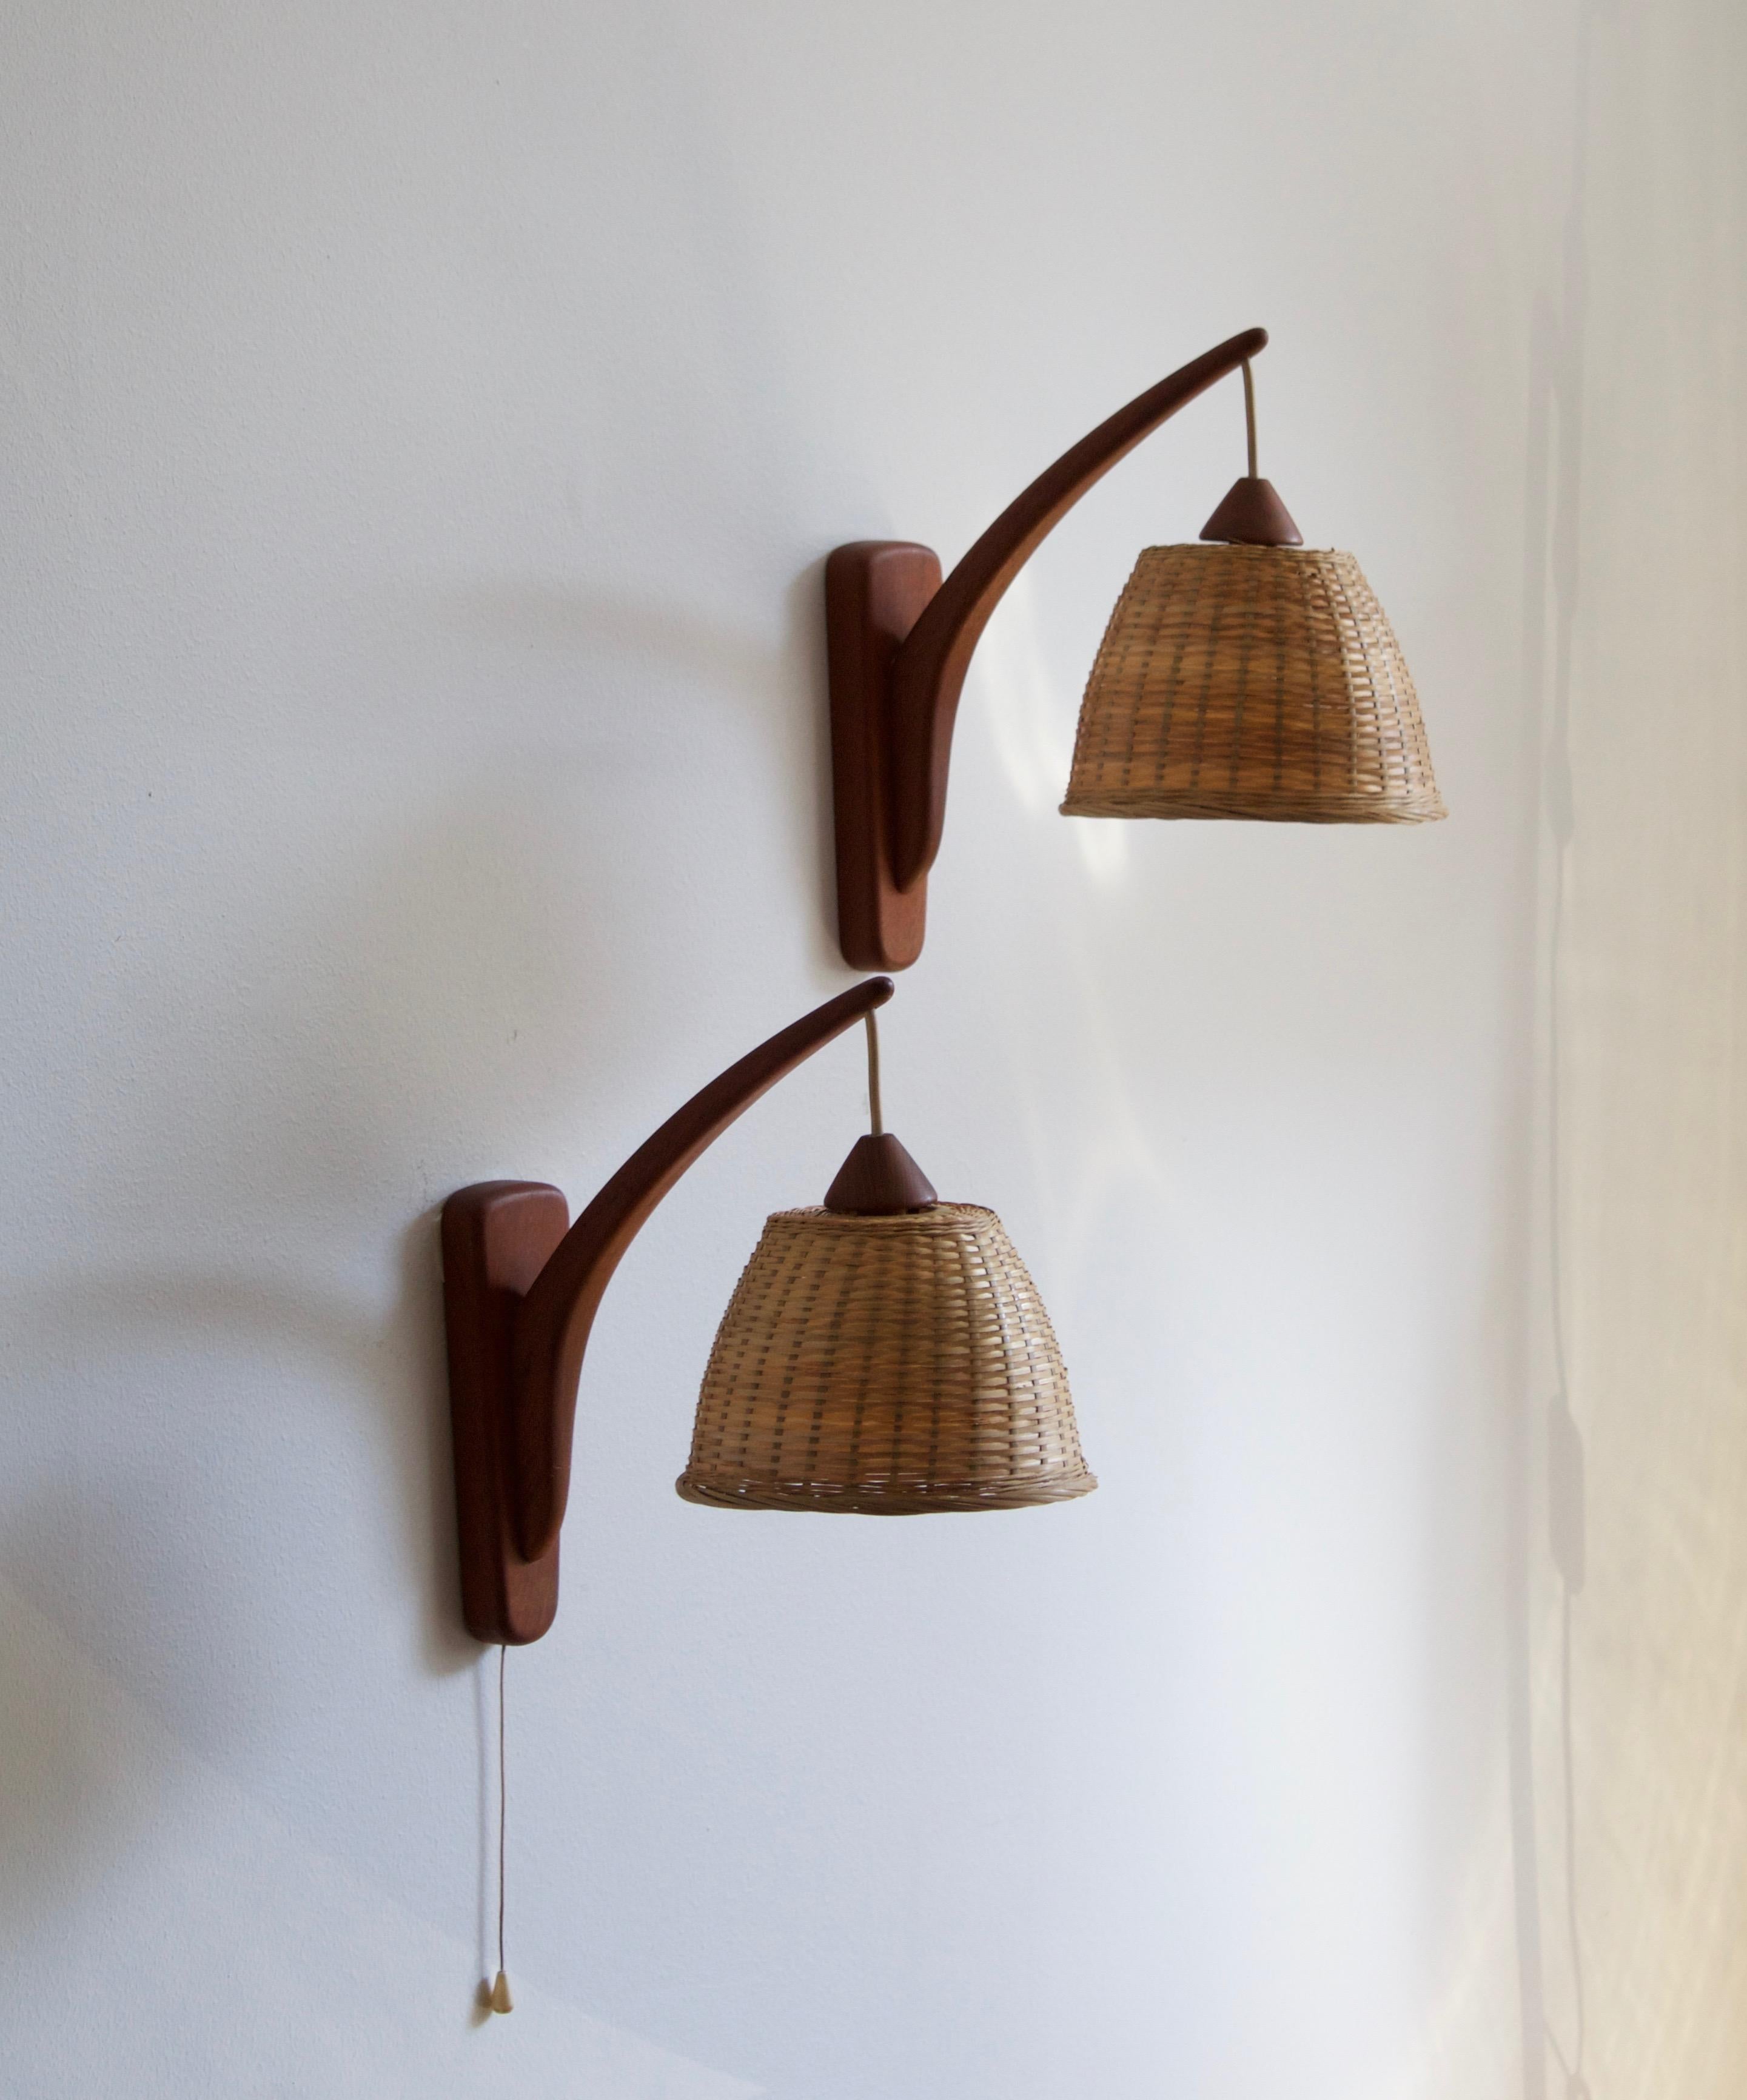 A pair of wall lights / sconces. Designed and produced in Denmark, 1950s. Assorted vintage rattan lampshades.